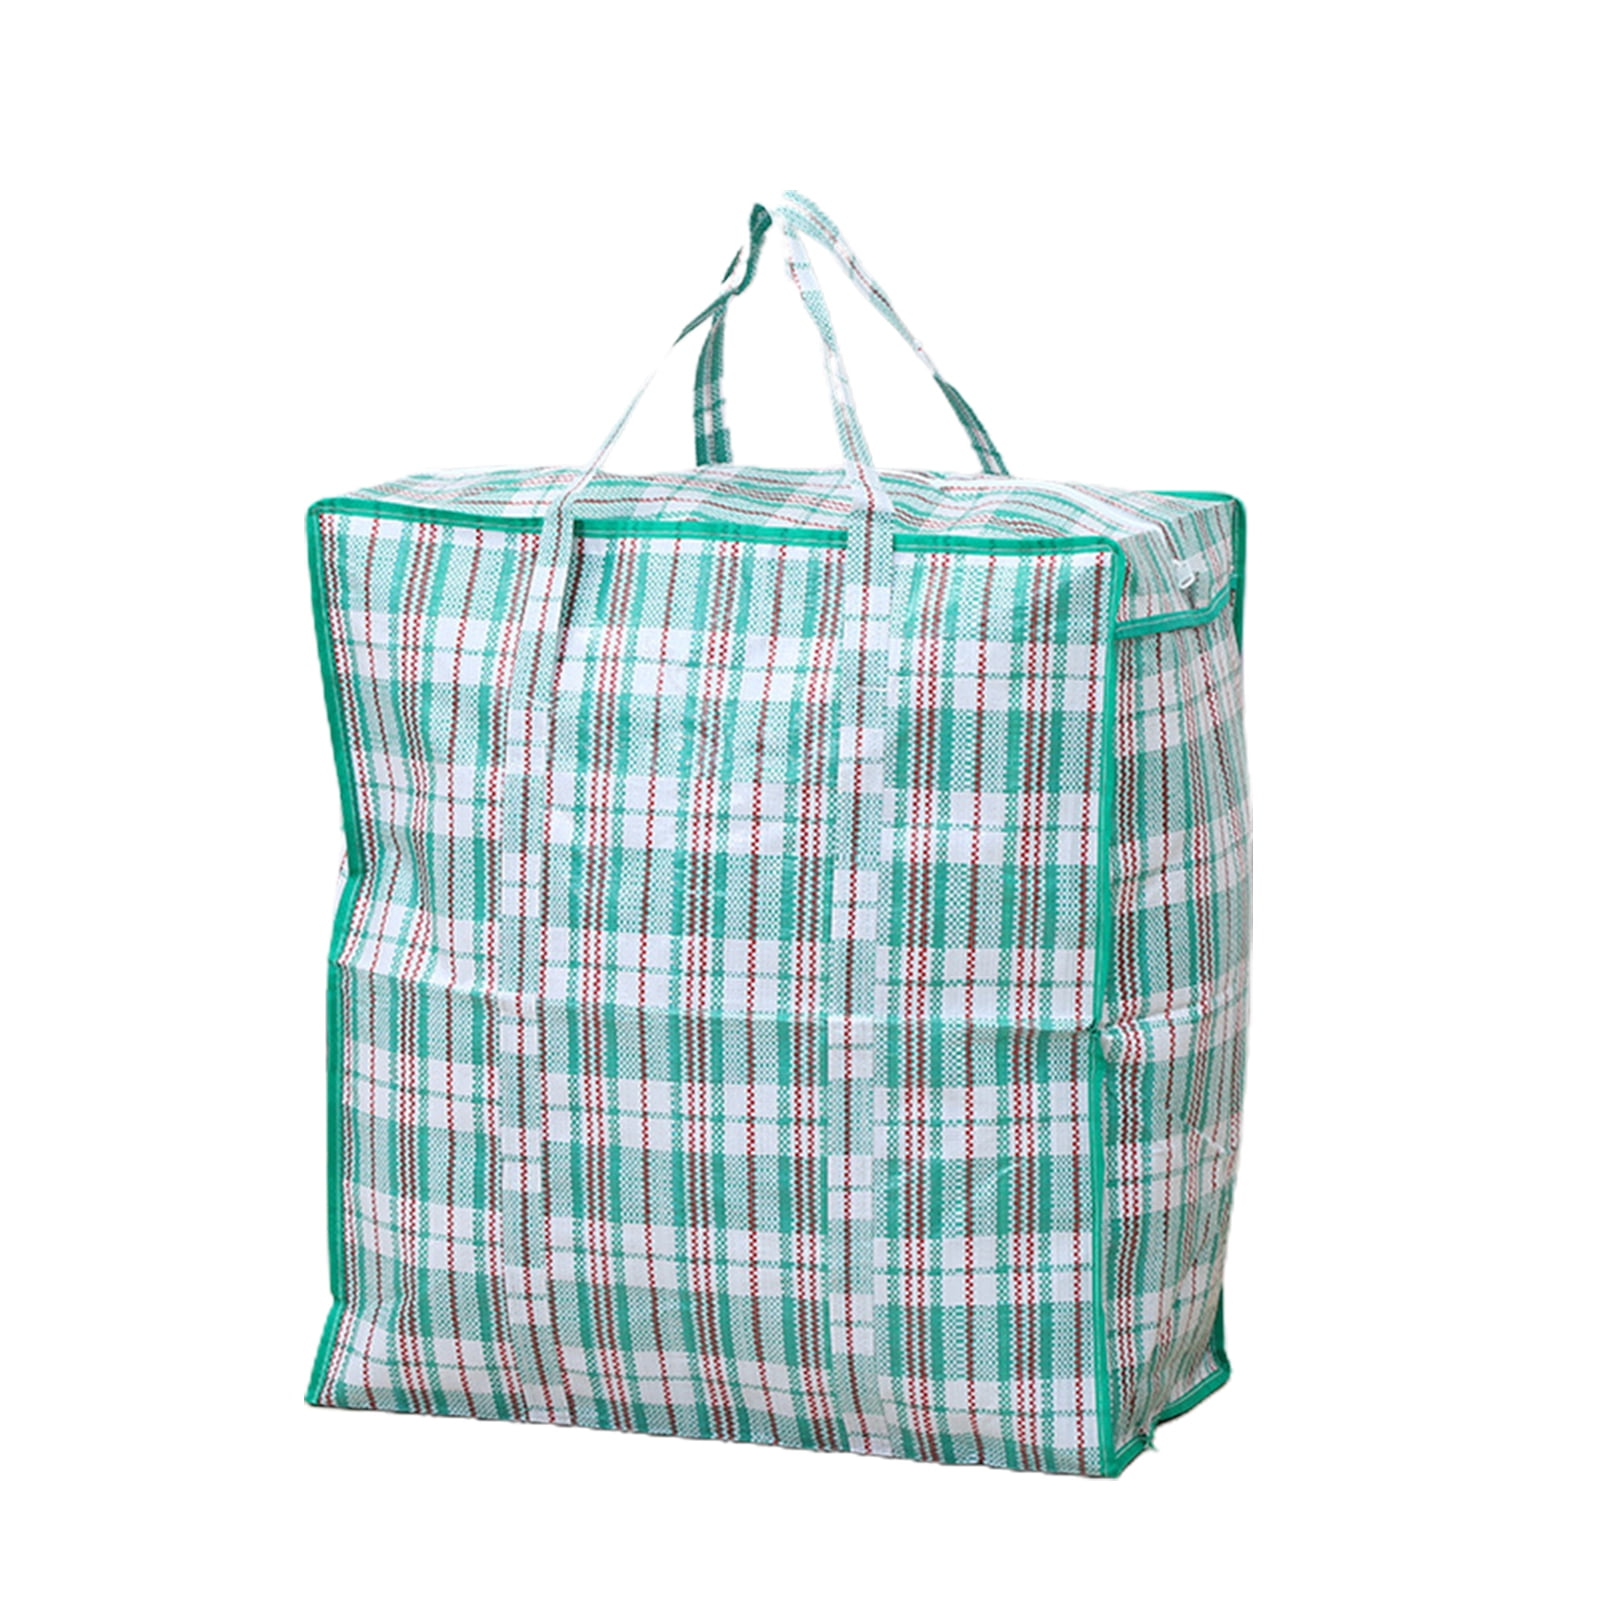 Honrane Dirt-proof Quilt Storage Bag with Zipper Non Woven Fabric Tear  Resistant Blanket Storage Bag for Sweaters 